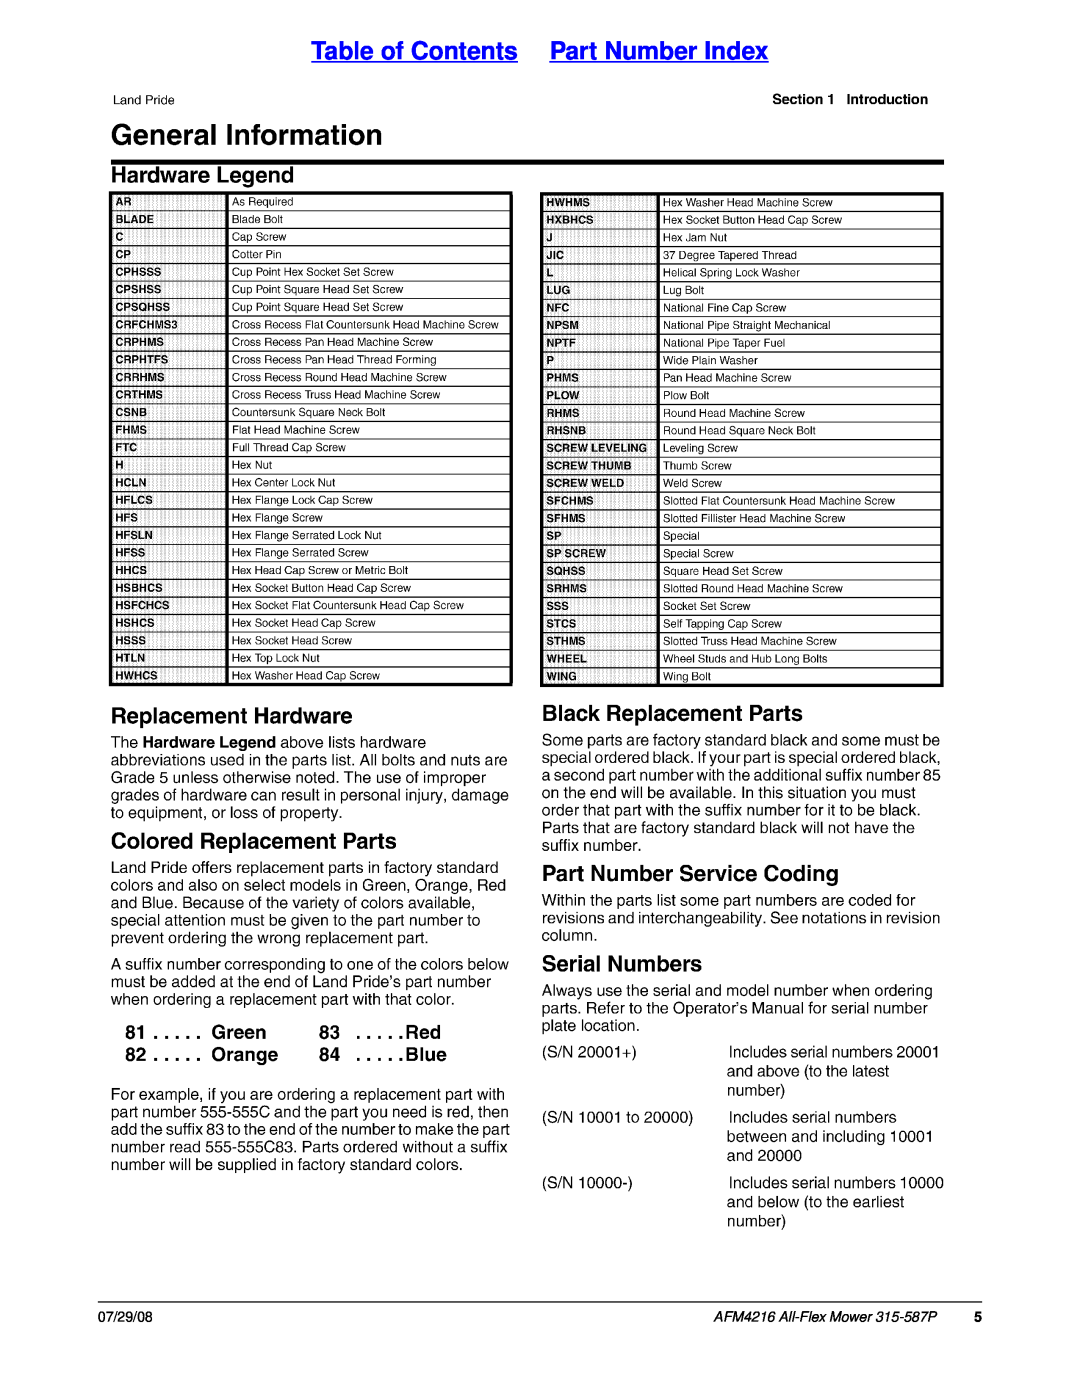 Land Pride manual Table of Contents Part Number Index, AFM4216 All-FlexMower 315-587P, 07/29/08 